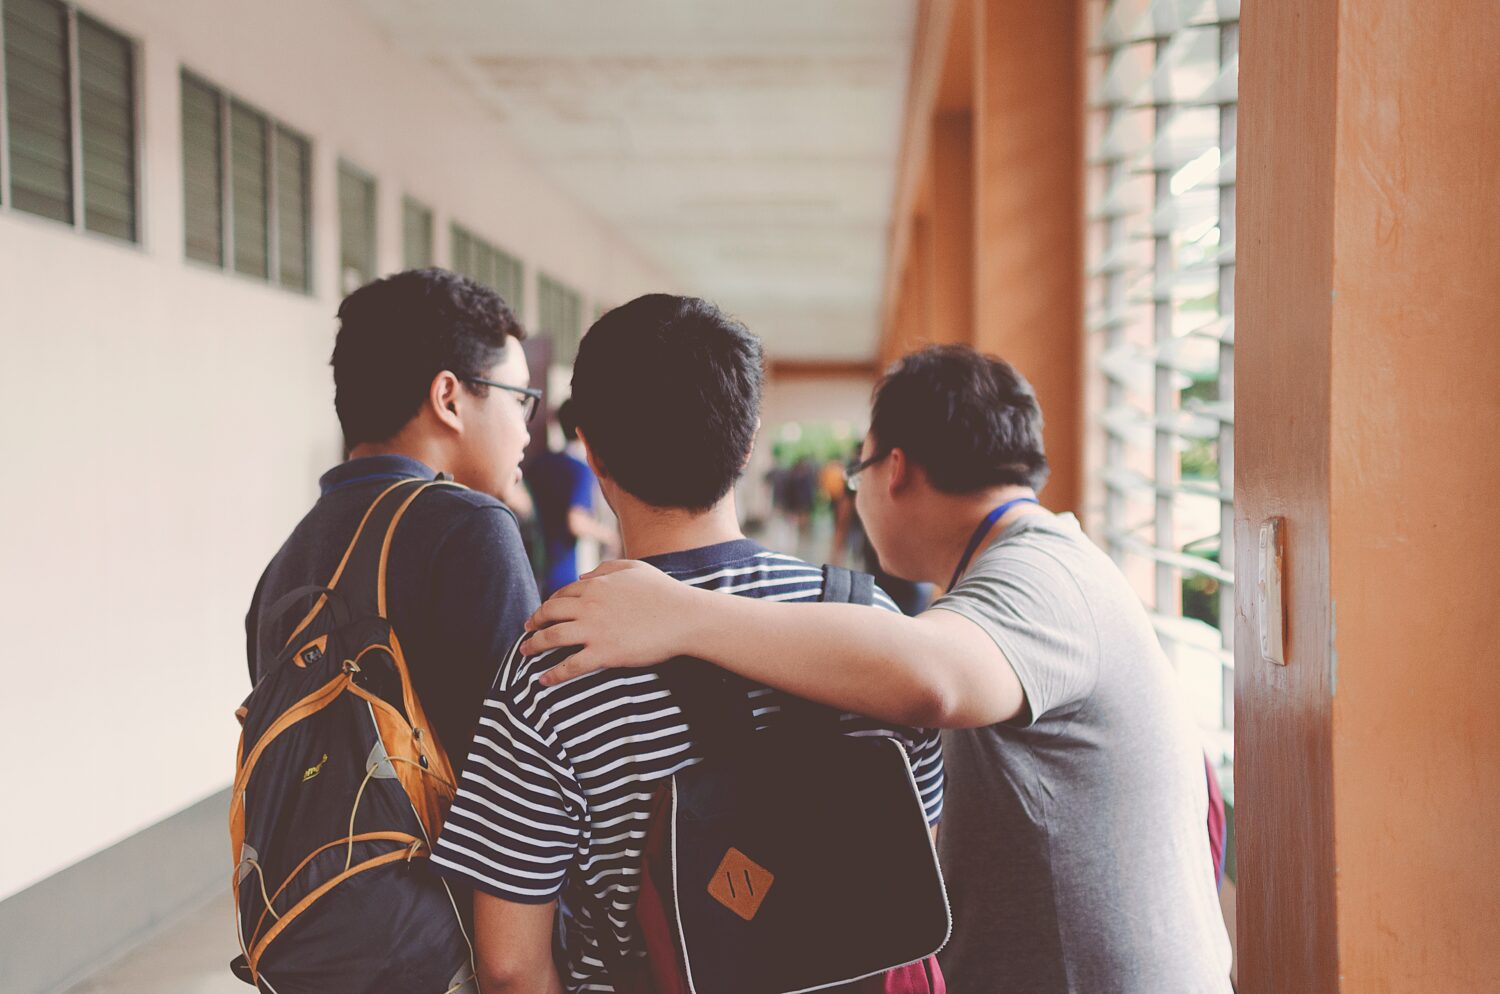 This image shows a corridor area of a school or educational institution. Three young boys appear to be talking with each other. Two of the boys are wearing a backpack.